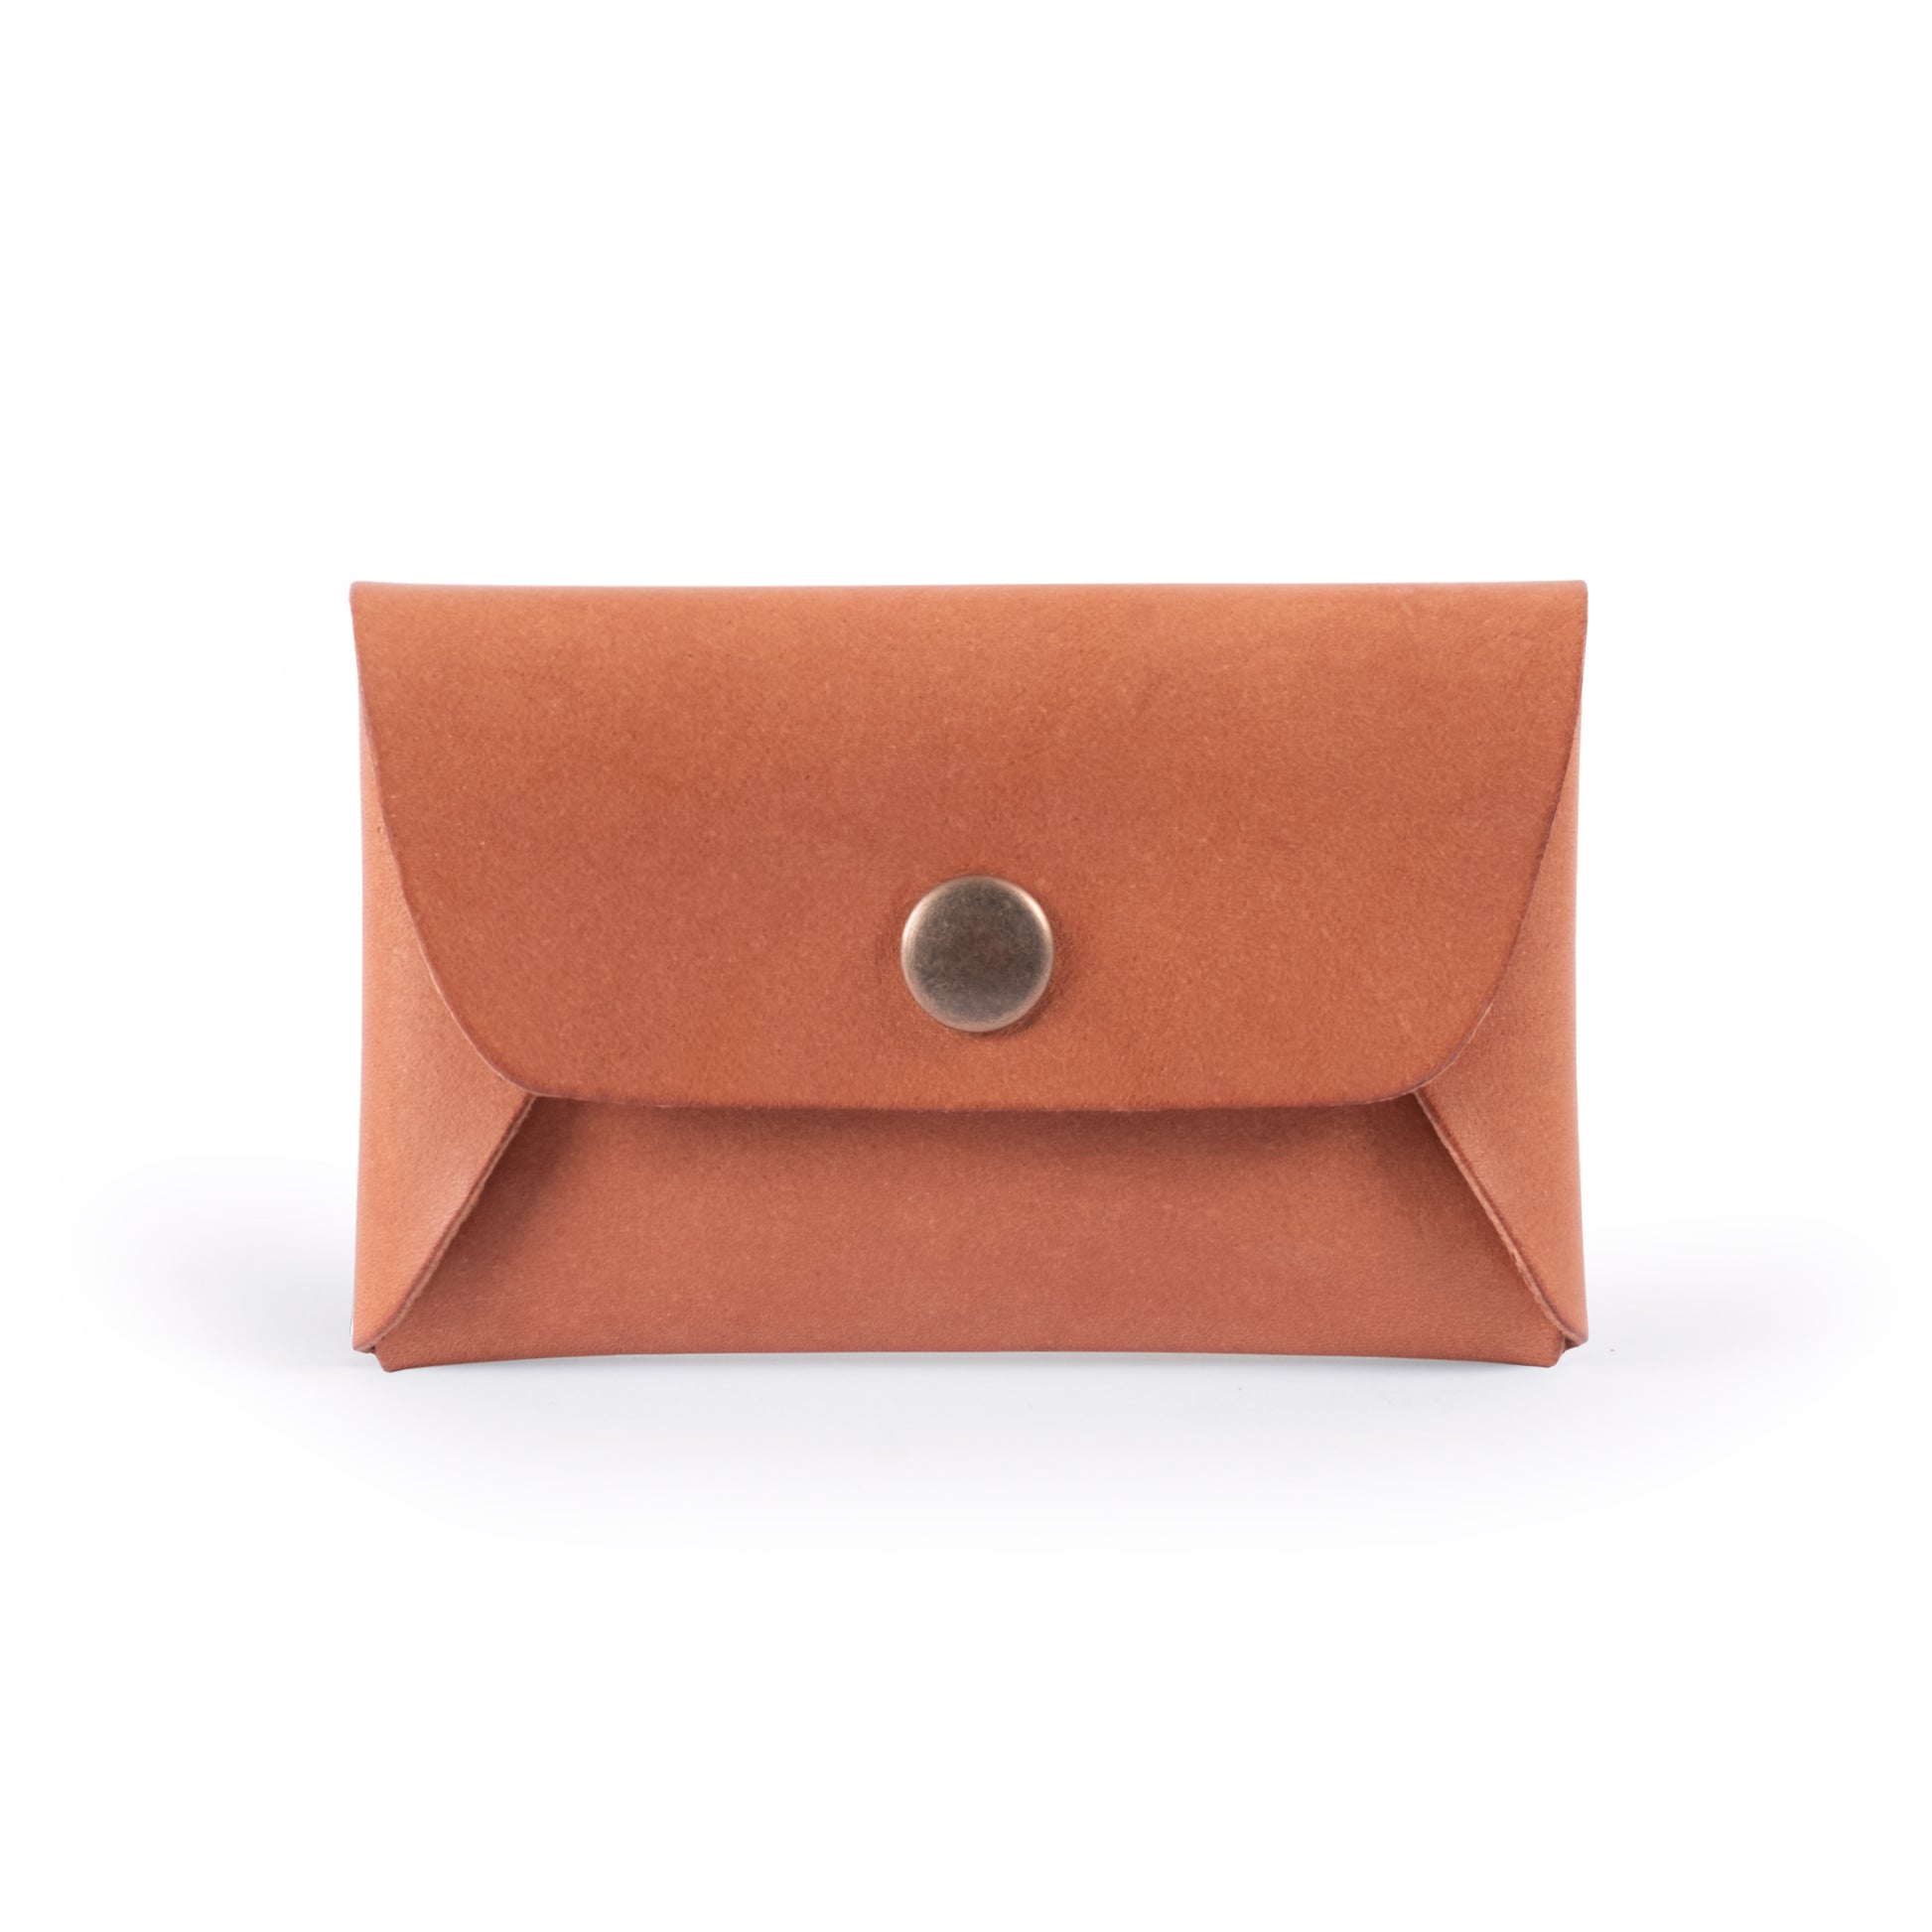 Smoll DIY Assembly, Envelope, Compact Wallet, European Veg-Tanned Leather,  Eco-Friendly, Innovative Origami Design, Coin/Card/Bill/ID Holder, MIT